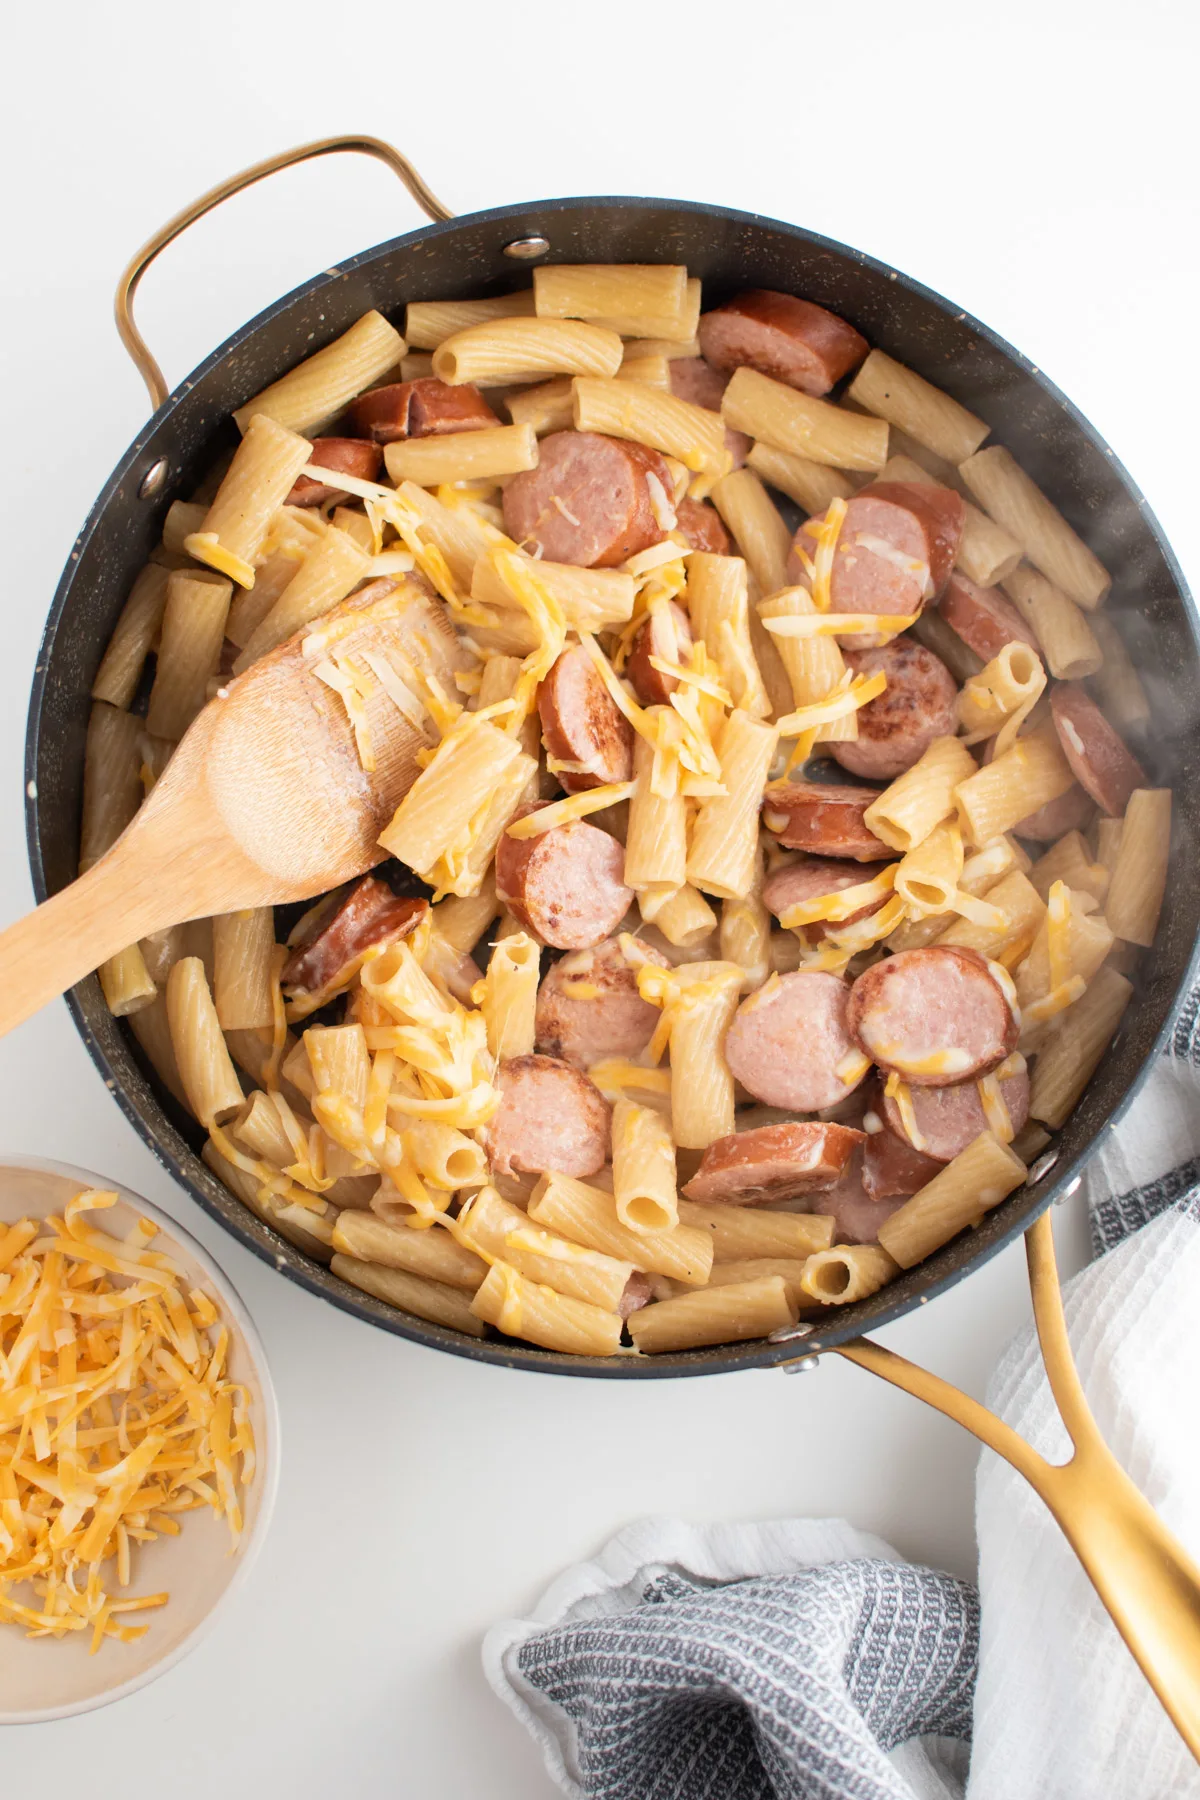 Shredded cheese on top of steamy kielbasa pasta in skillet with wooden spoon.